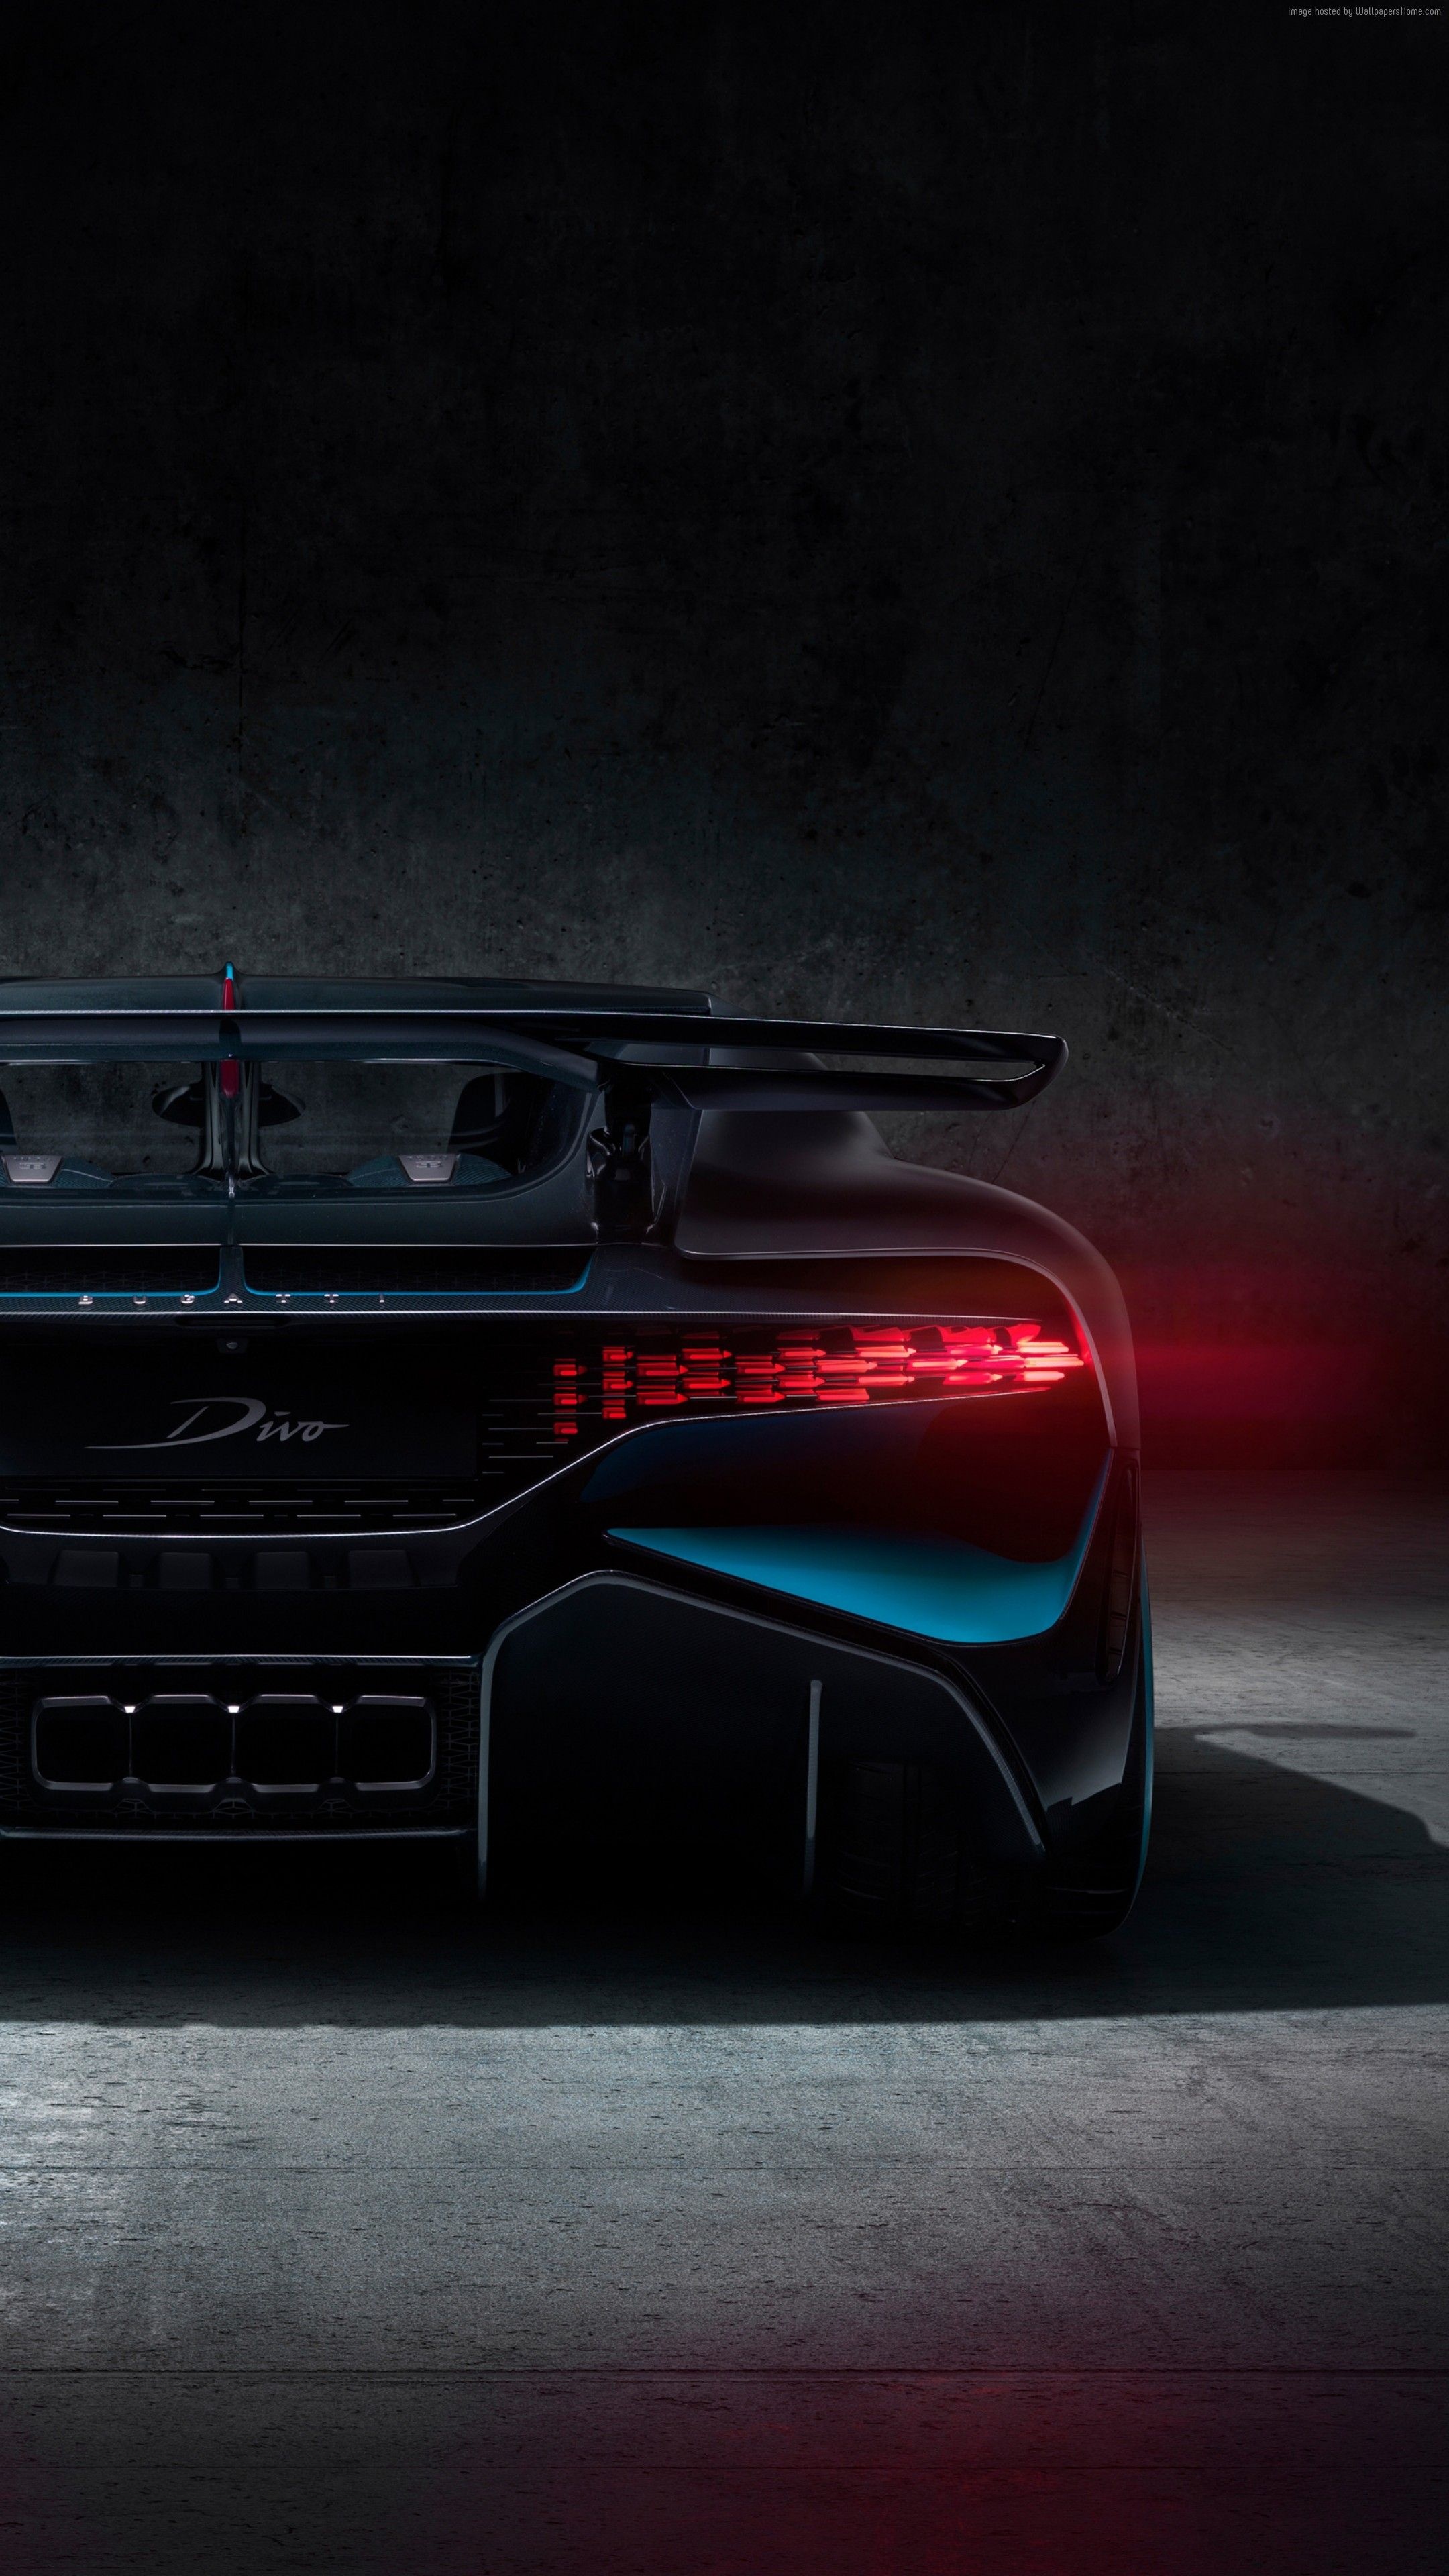 Bugatti Divo, Exclusive wallpapers, High-quality images, Luxury auto, 2160x3840 4K Phone